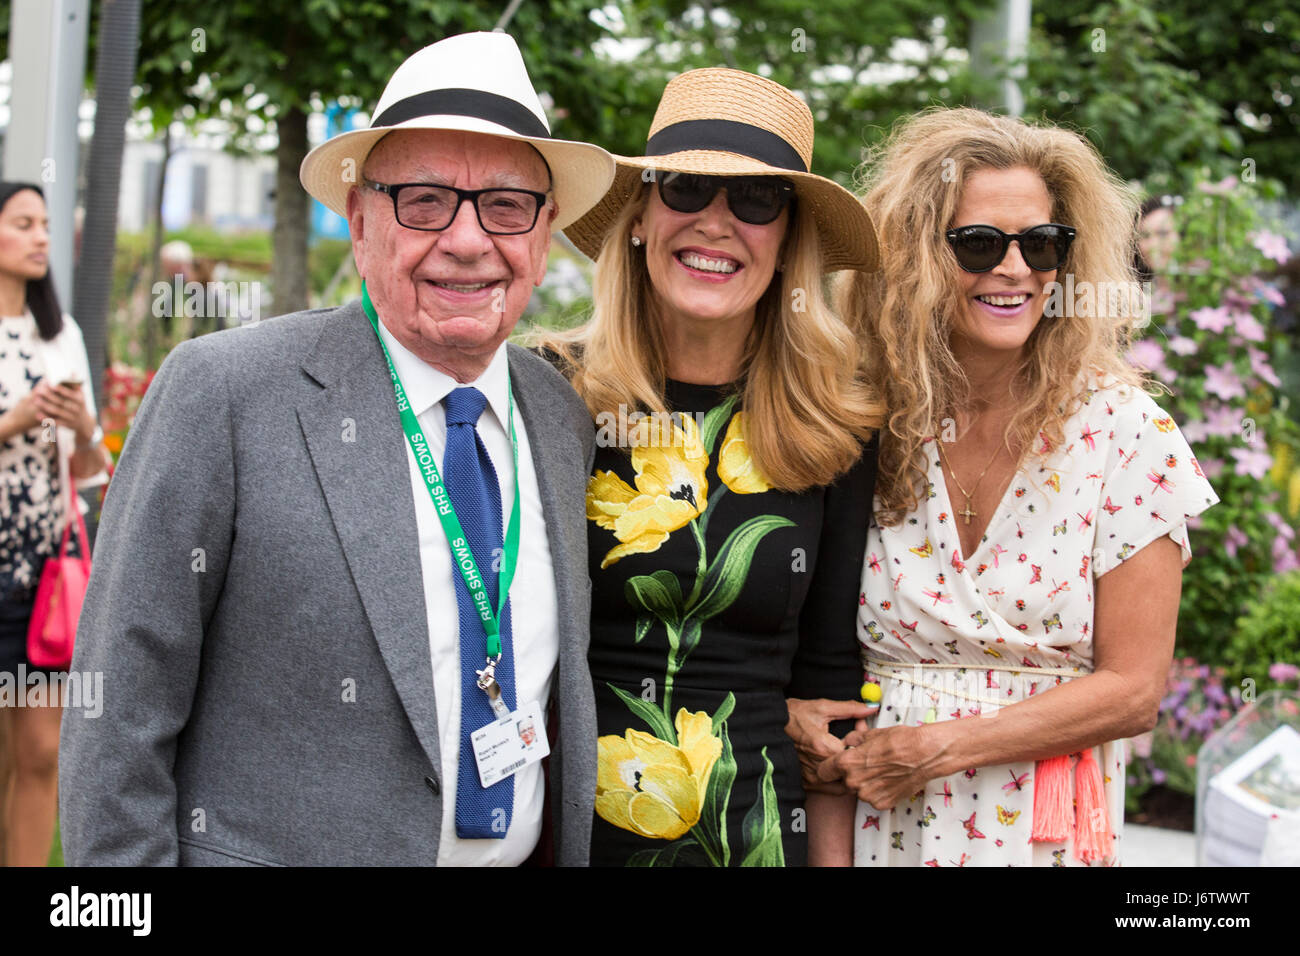 London, UK. 22 May 2017. Rupert Murdoch, Jerry Hall and Suzanne Wyman. Press Day at the 2017 RHS Chelsea Flower Show which opens to the public tomorrow. Photo: Vibrant Pictures/Alamy Live News Stock Photo